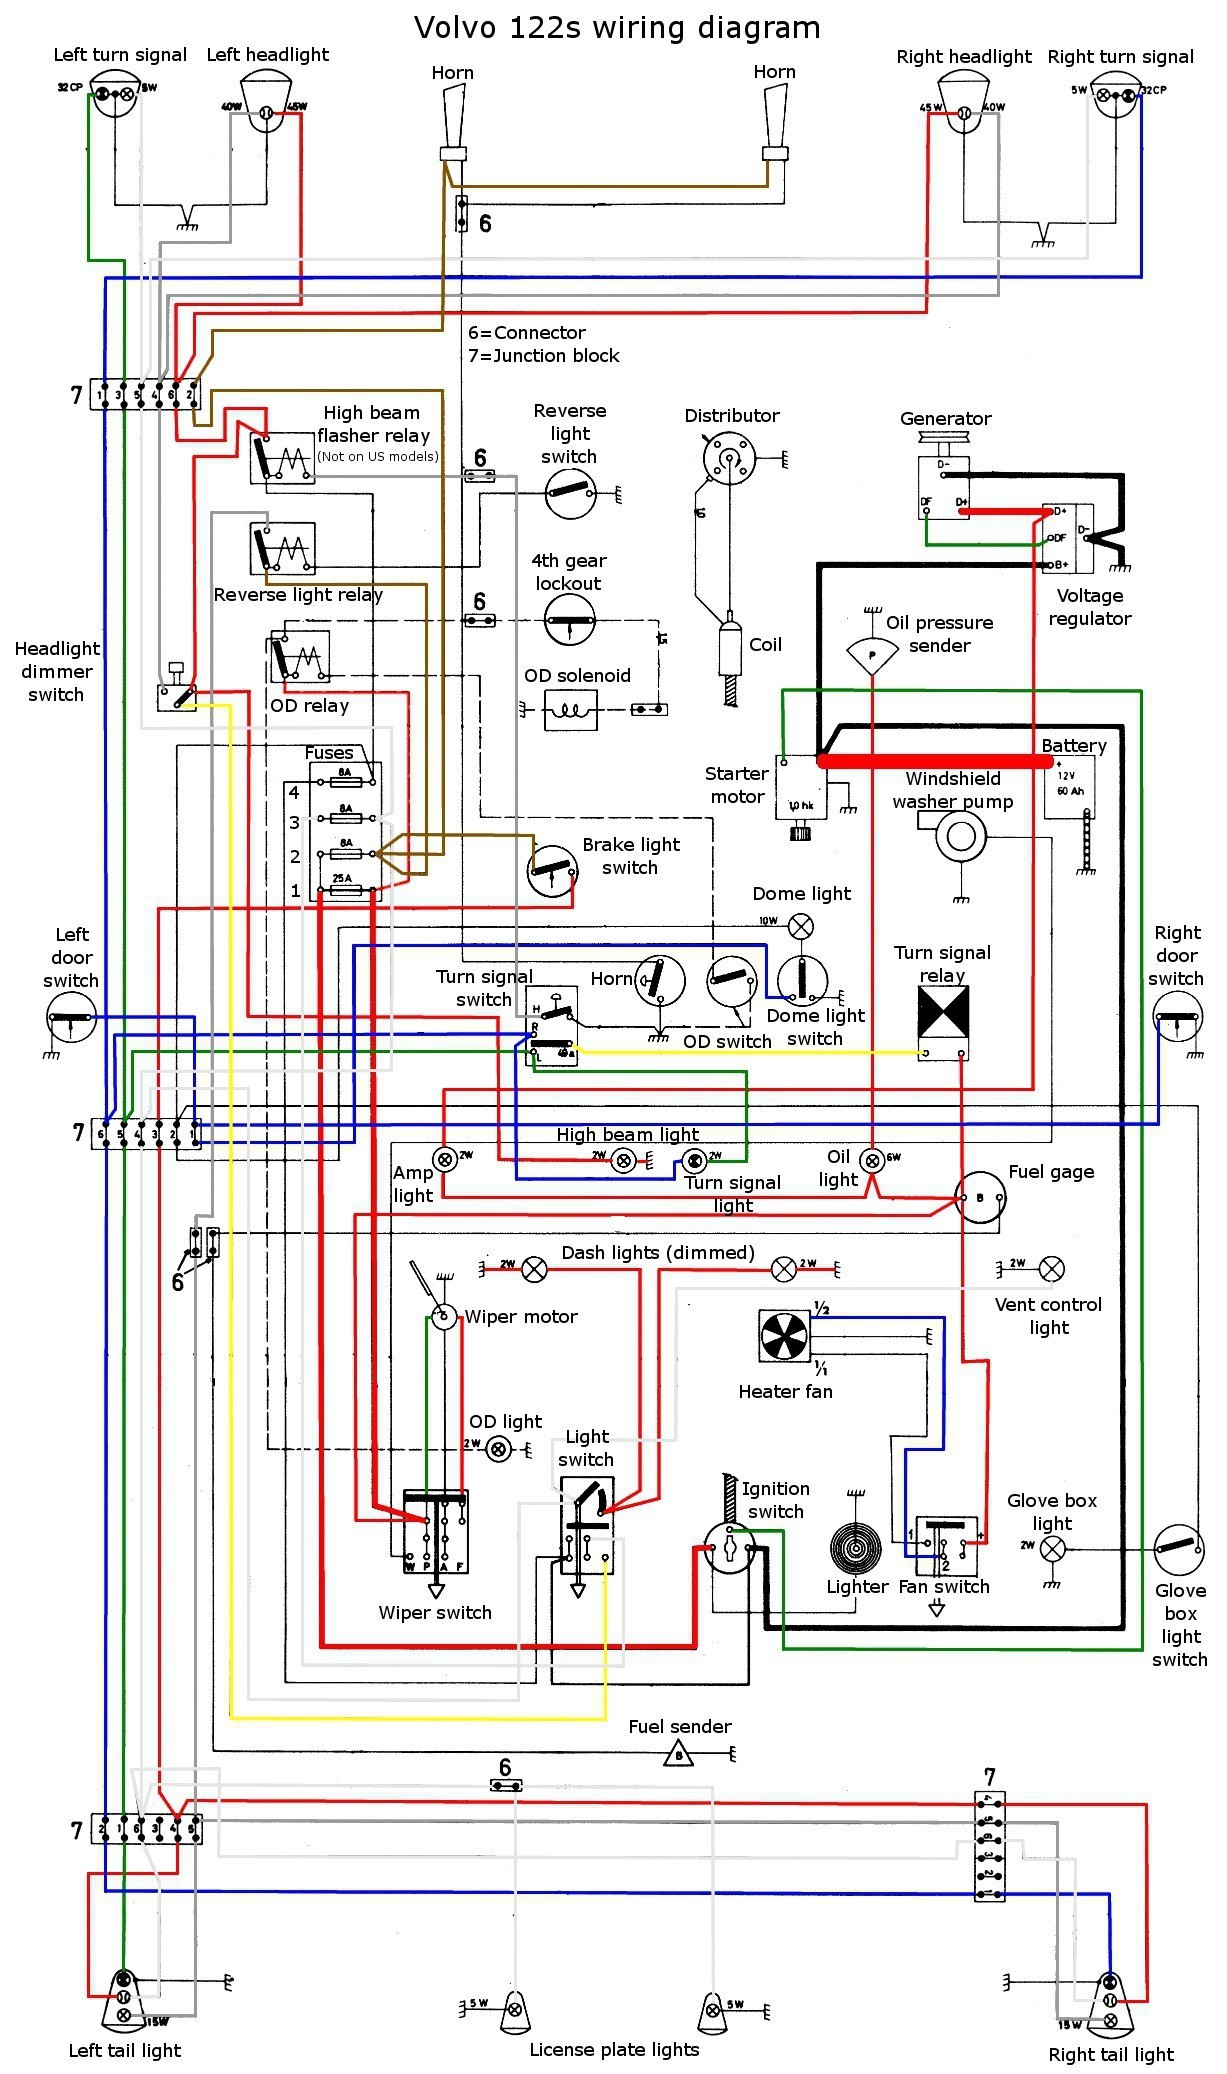 Amp Research Power Step Wiring Diagram Inspirational Wiring Diagram Power Amplifier New Amp Research Power Step Wiring